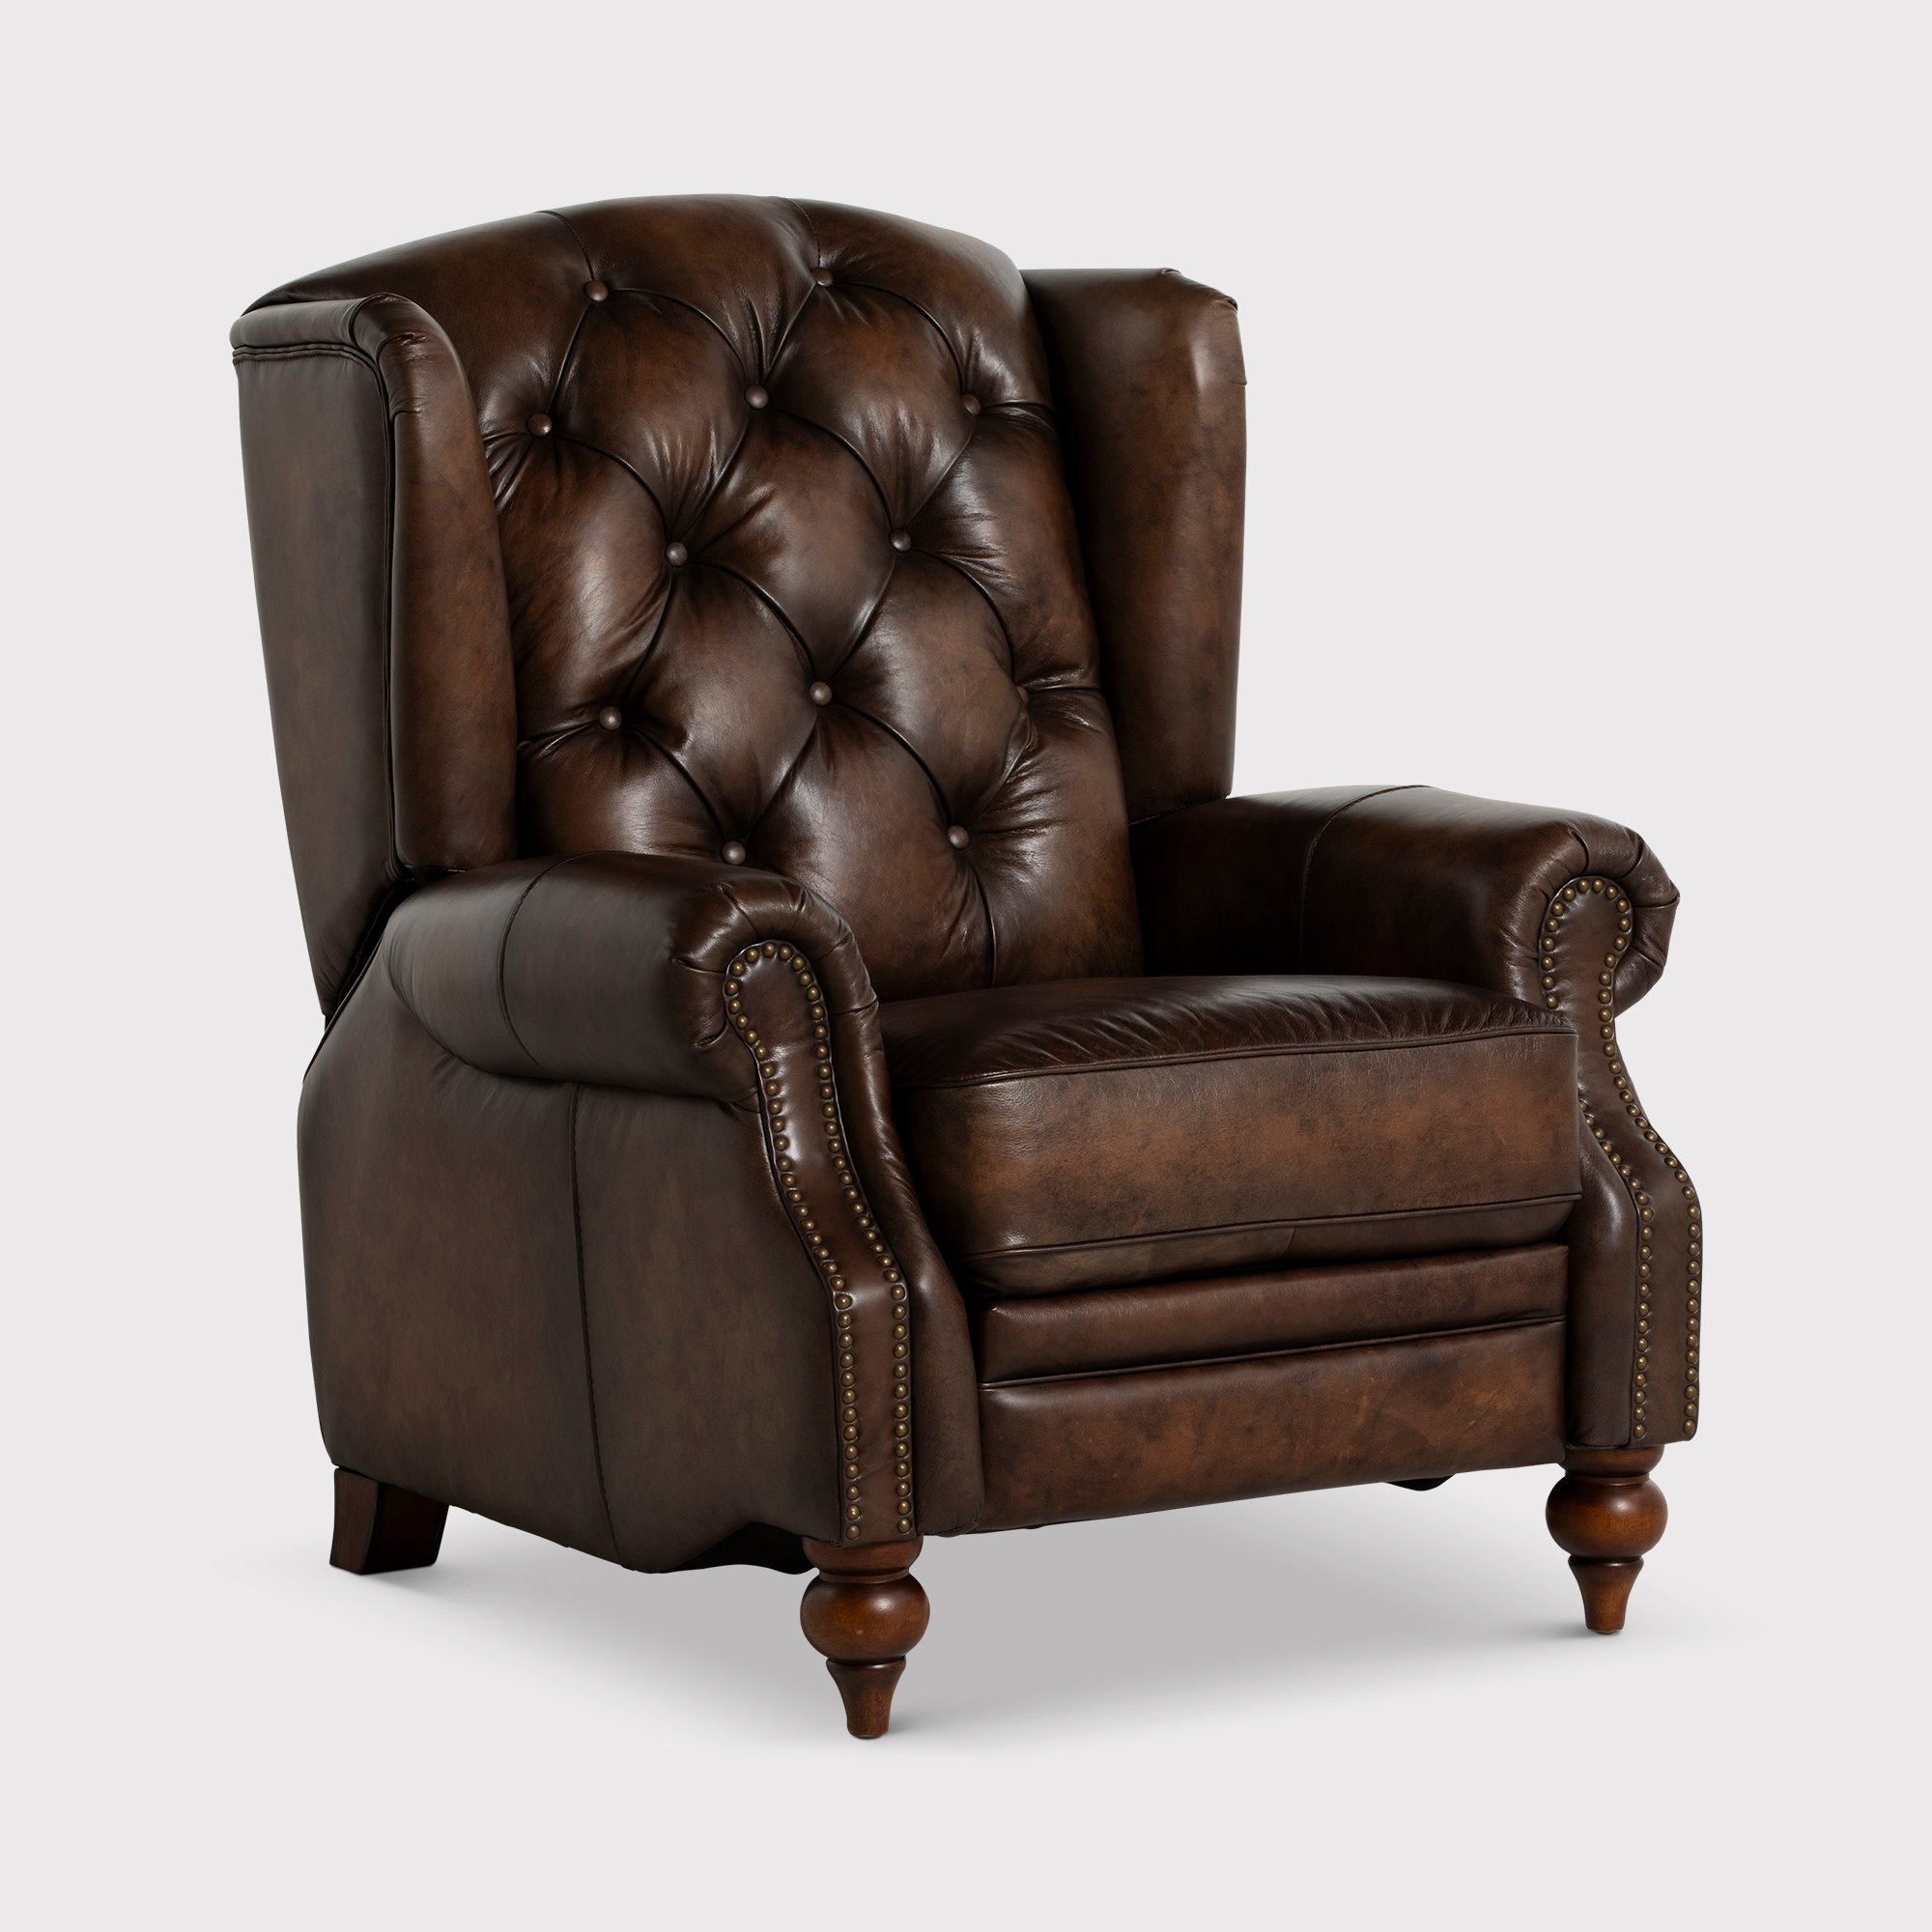 Ullswater Power Recliner Wing Recliner Chair Sofa, Brown Fabric | Barker & Stonehouse